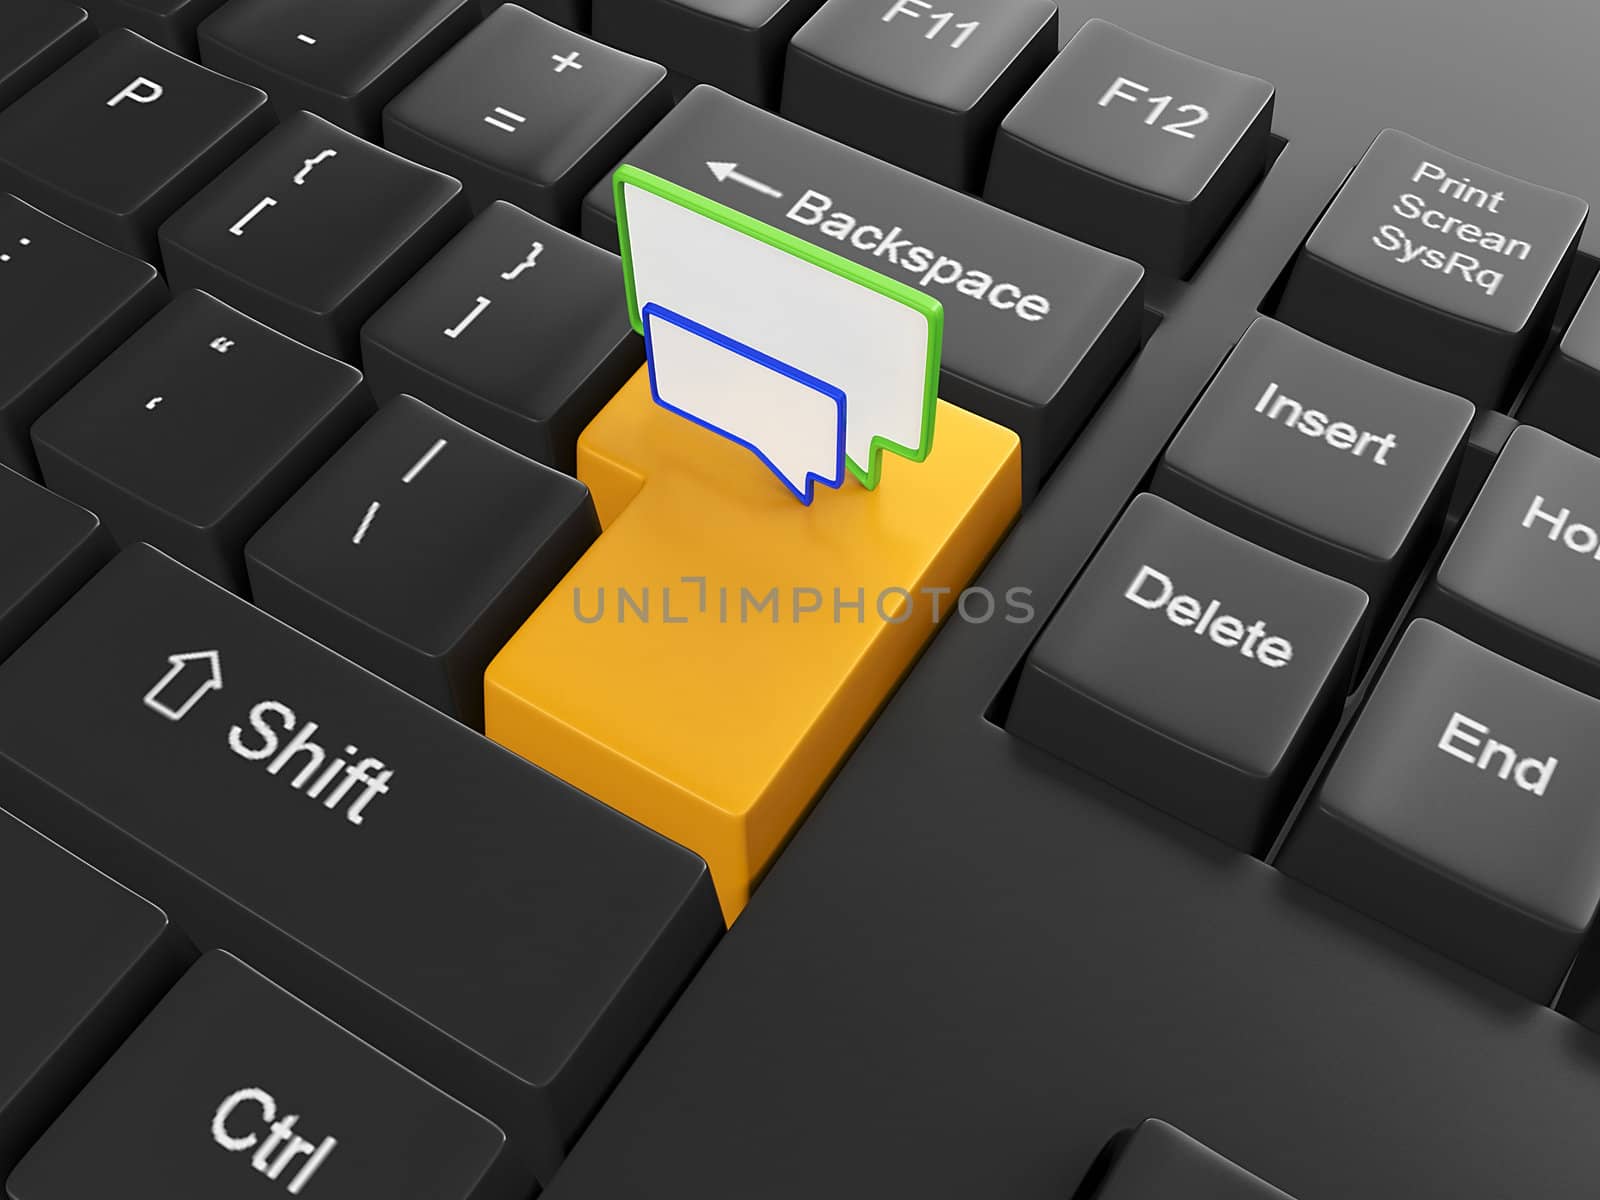 3d illustration of computer technologies. Button to send a message